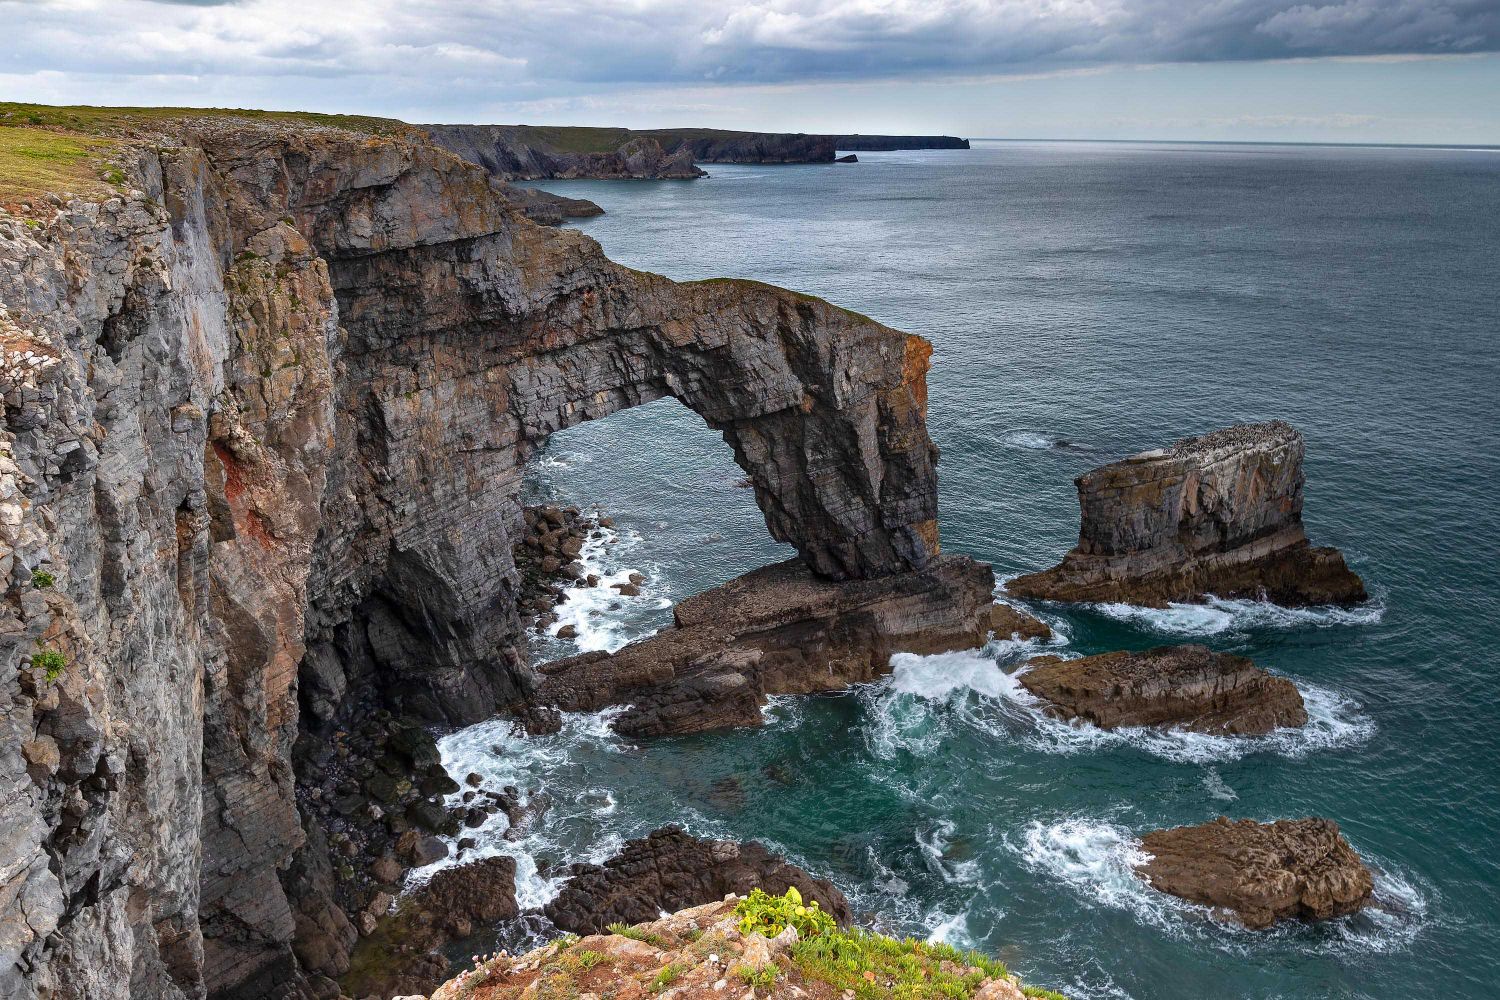 The Green Bridge of Wales which lies alongside the Pembrokeshire Coast Path